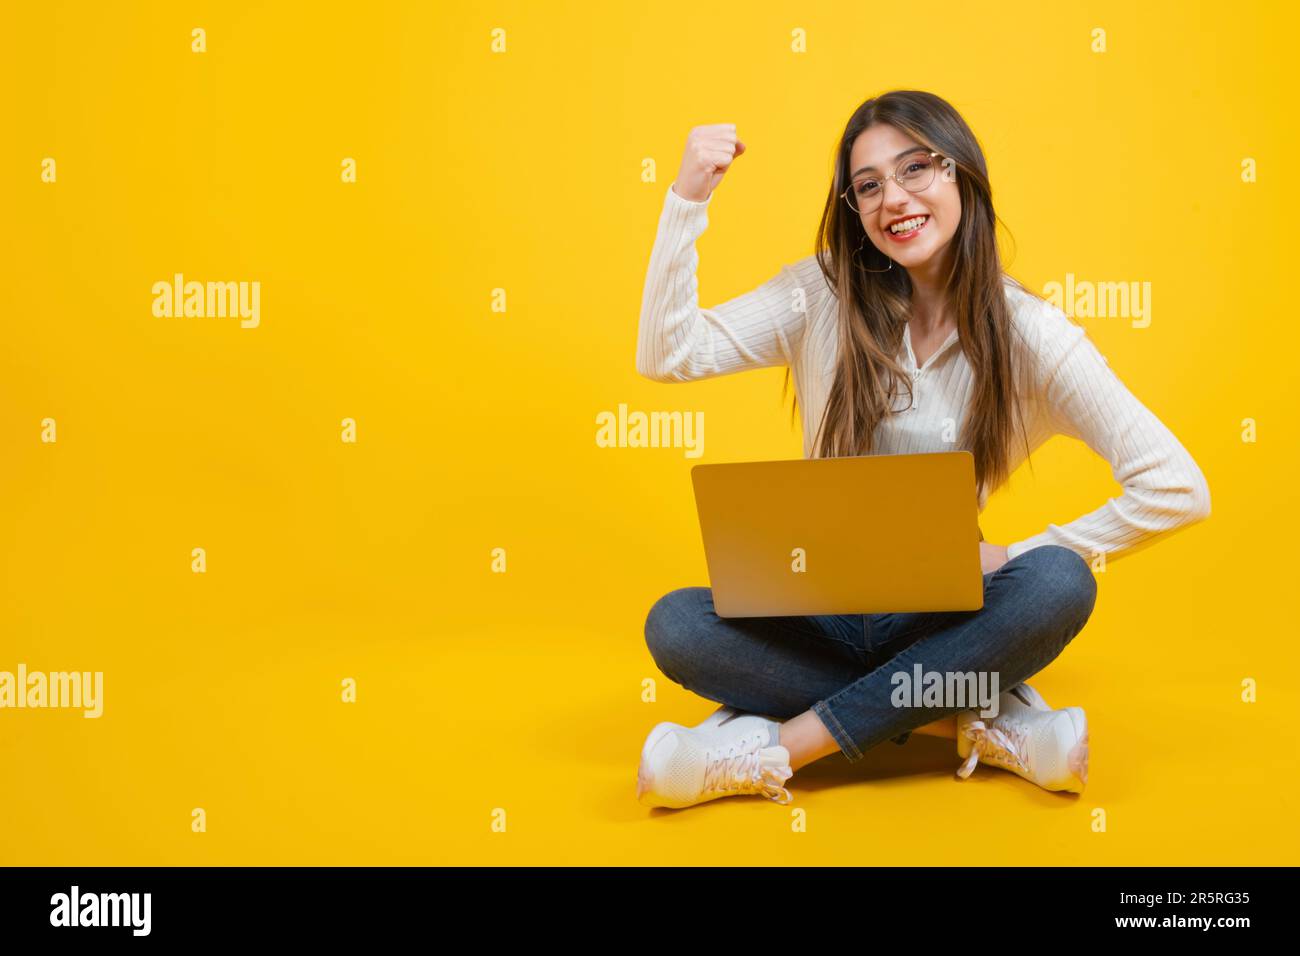 Full body view of strong confident woman. Female boss concept idea. Showing biceps, looking smiling with proud. Feeling success and power. Stock Photo